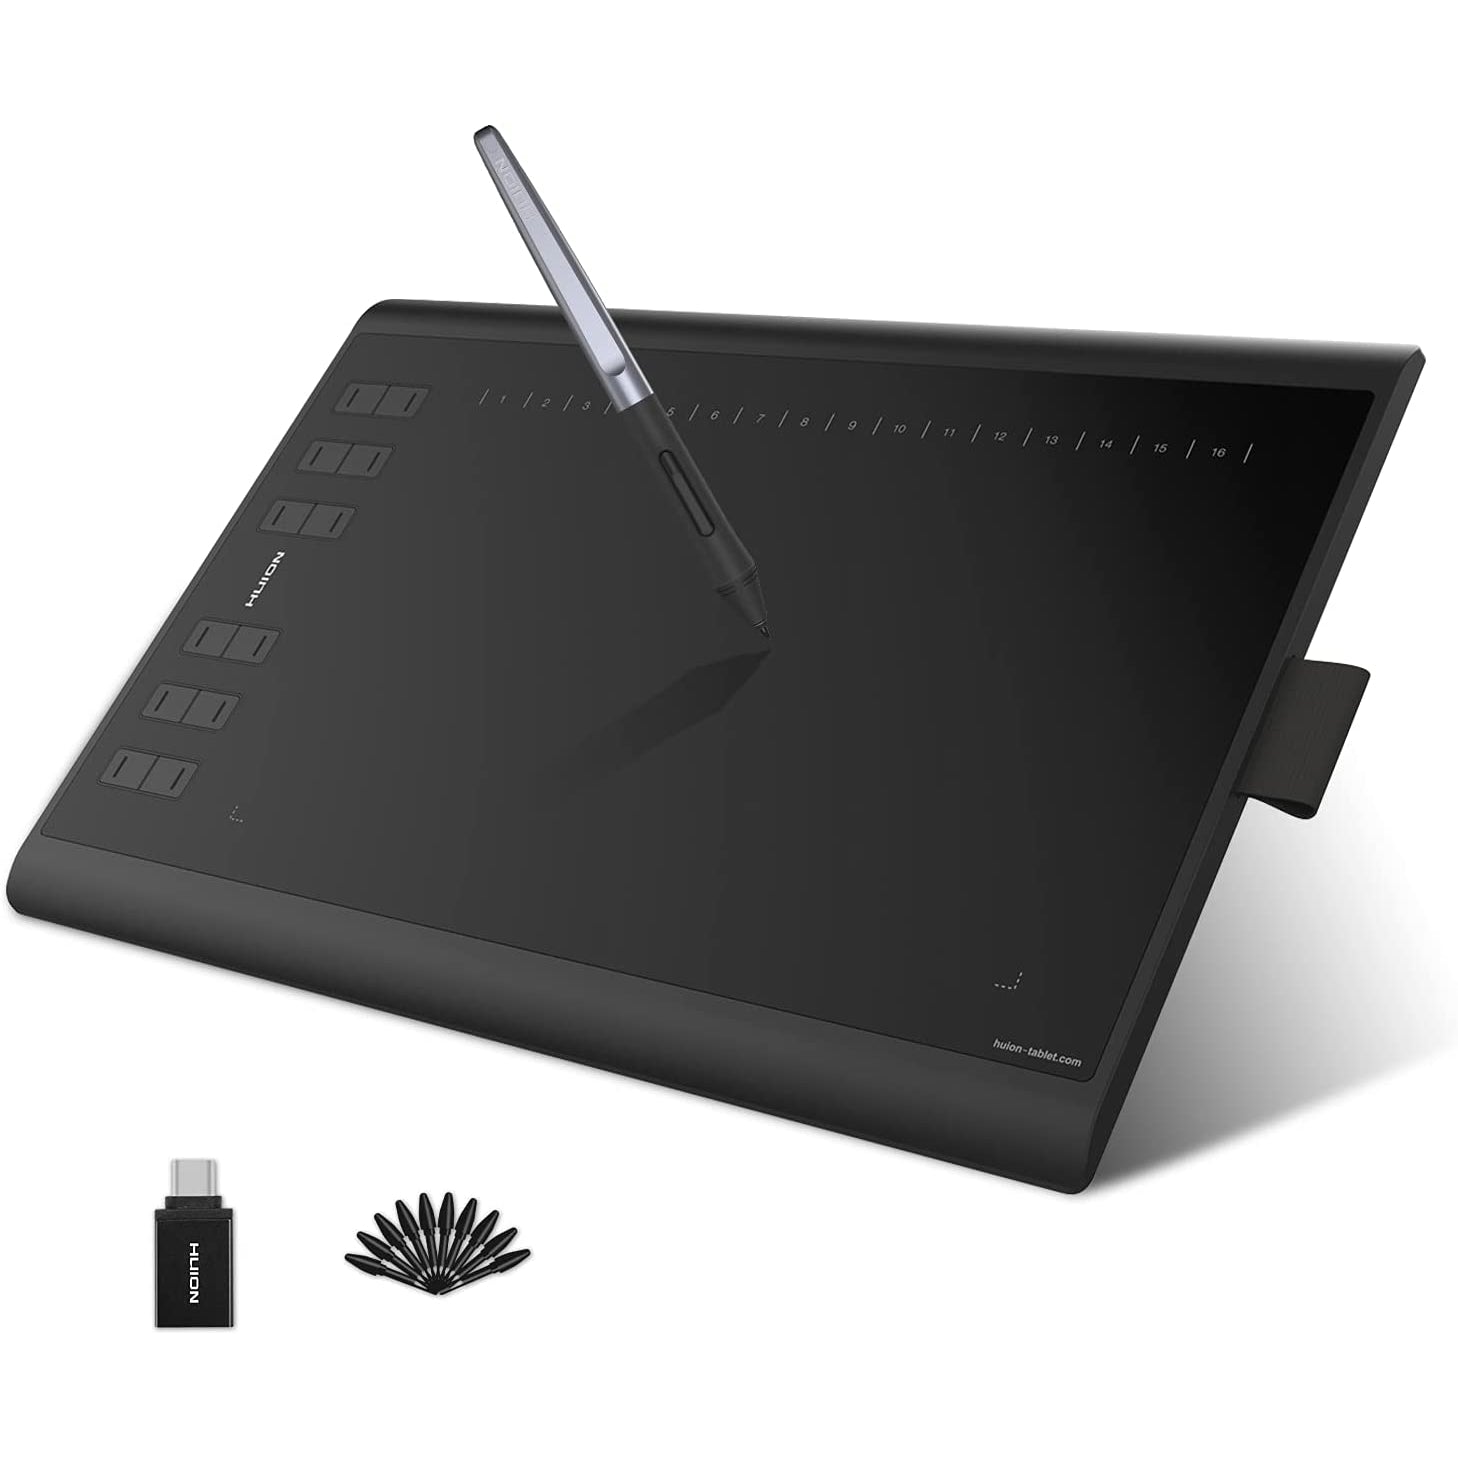 Huion Inspiroy H1060P Graphics Drawing Tablet, Graphic Tablet with Battery-free Pen